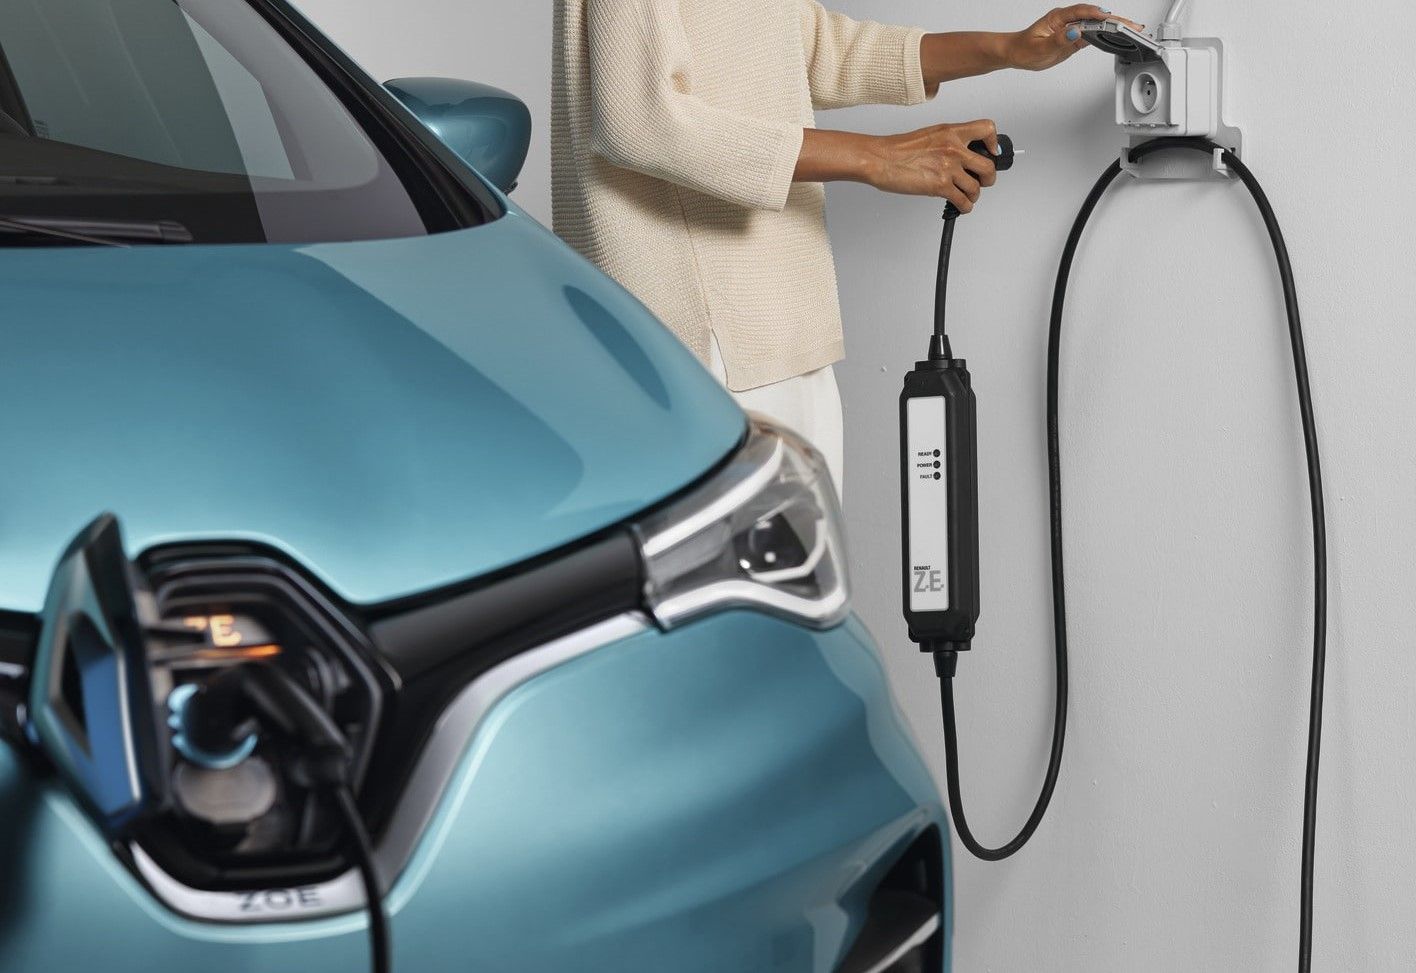 renault zoe using powerpoint portable charger